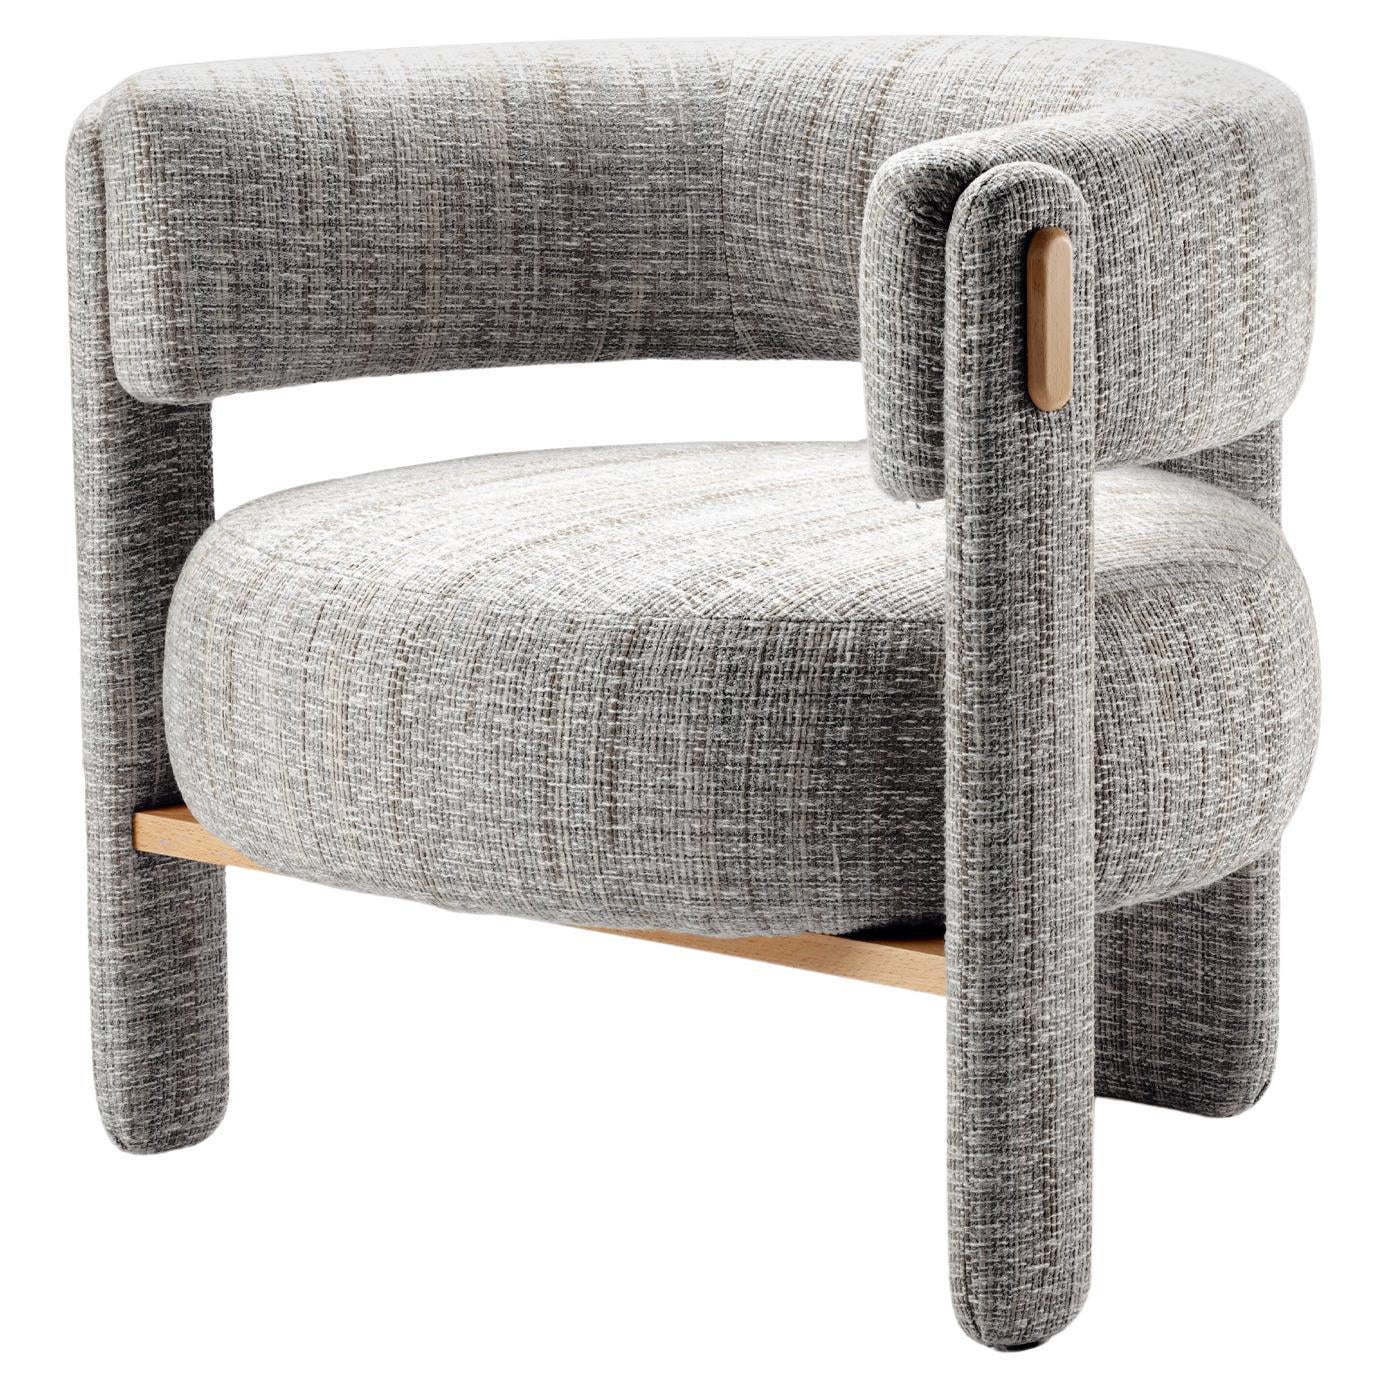 Choux Armchair with Bayes Carbon Fabric and Natural Wood Applications